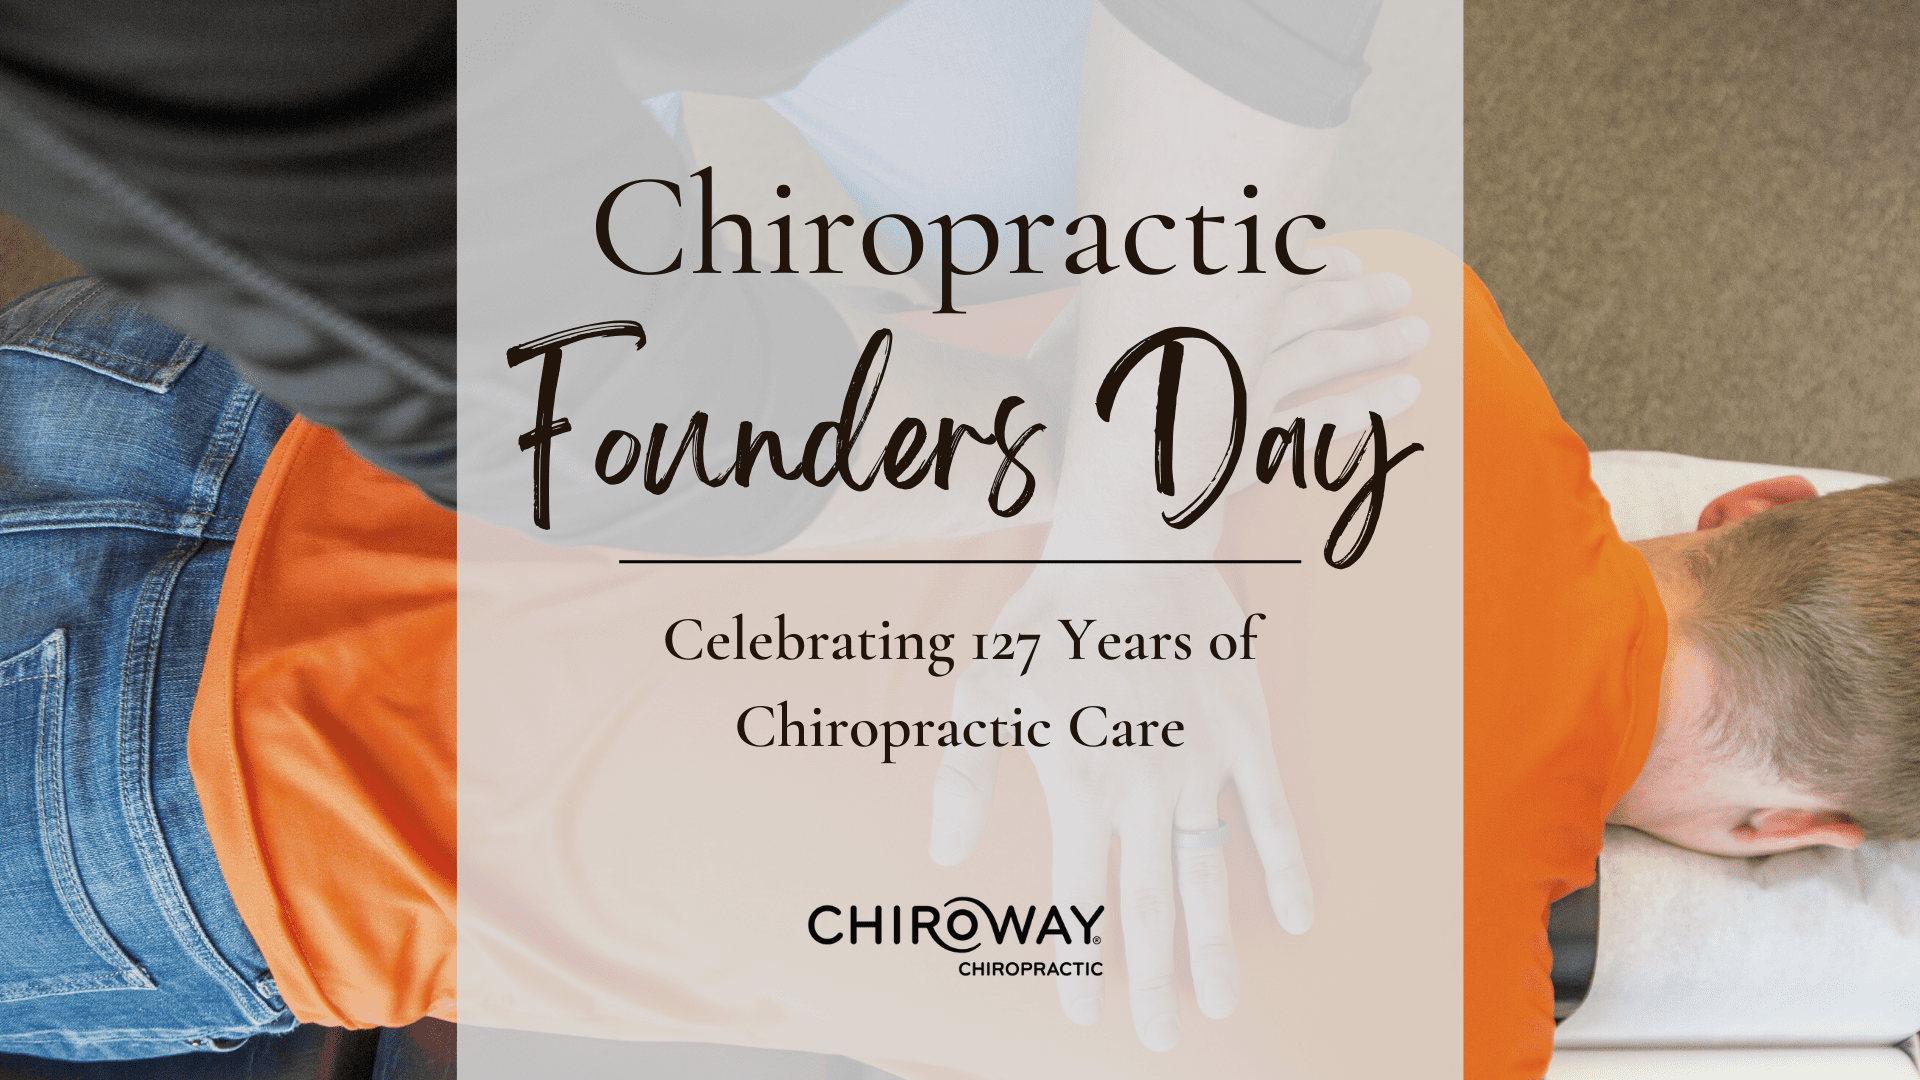 Chiropractic Founders Day